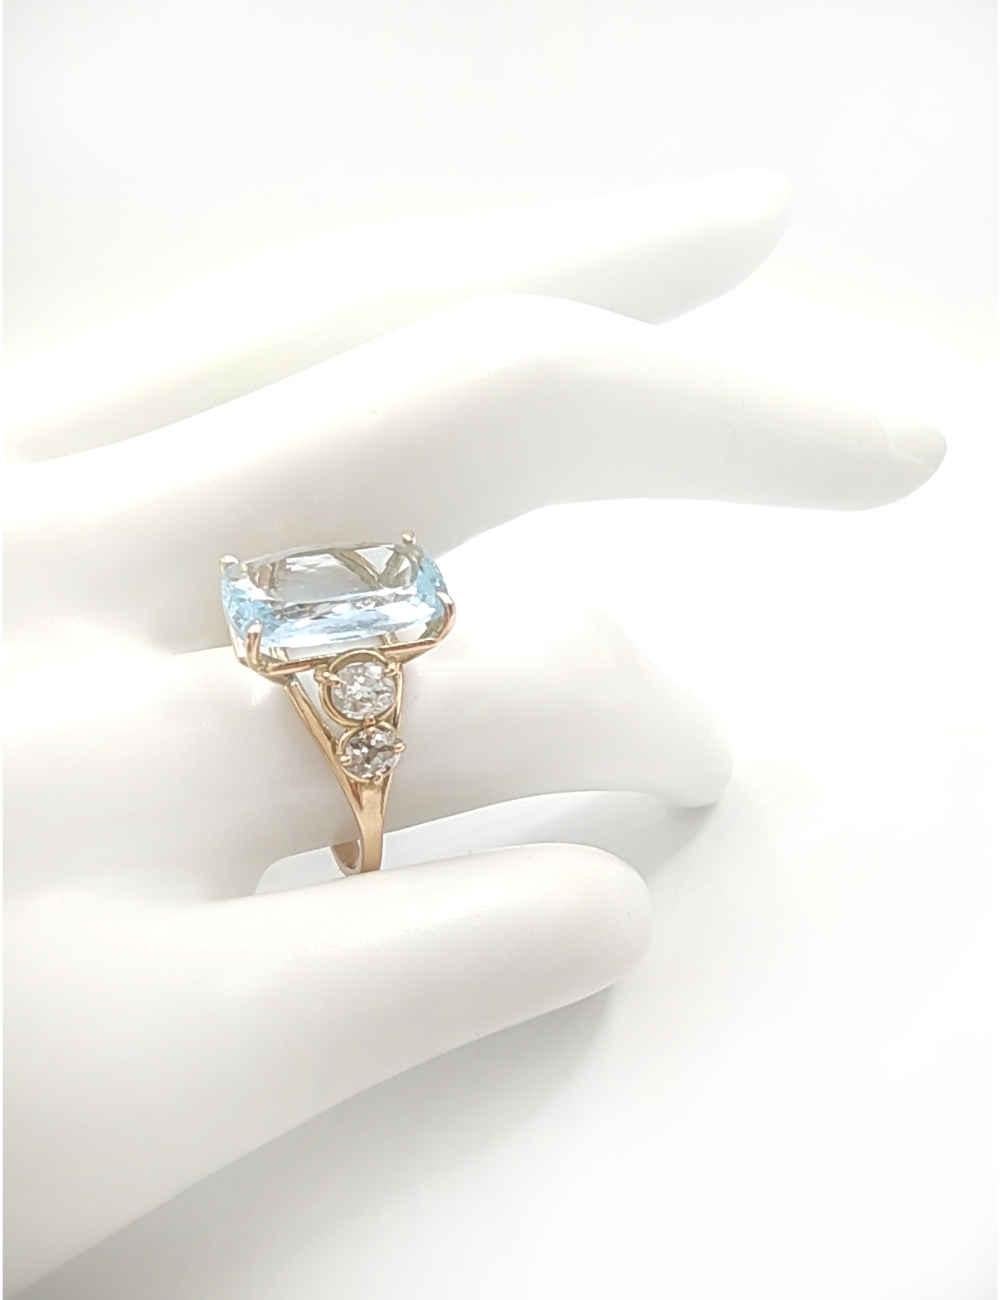 Asscher Cut Certified 3.44 carats Aquamarine Cocktail Ring - 14kt yellow Gold Handcrafted For Sale